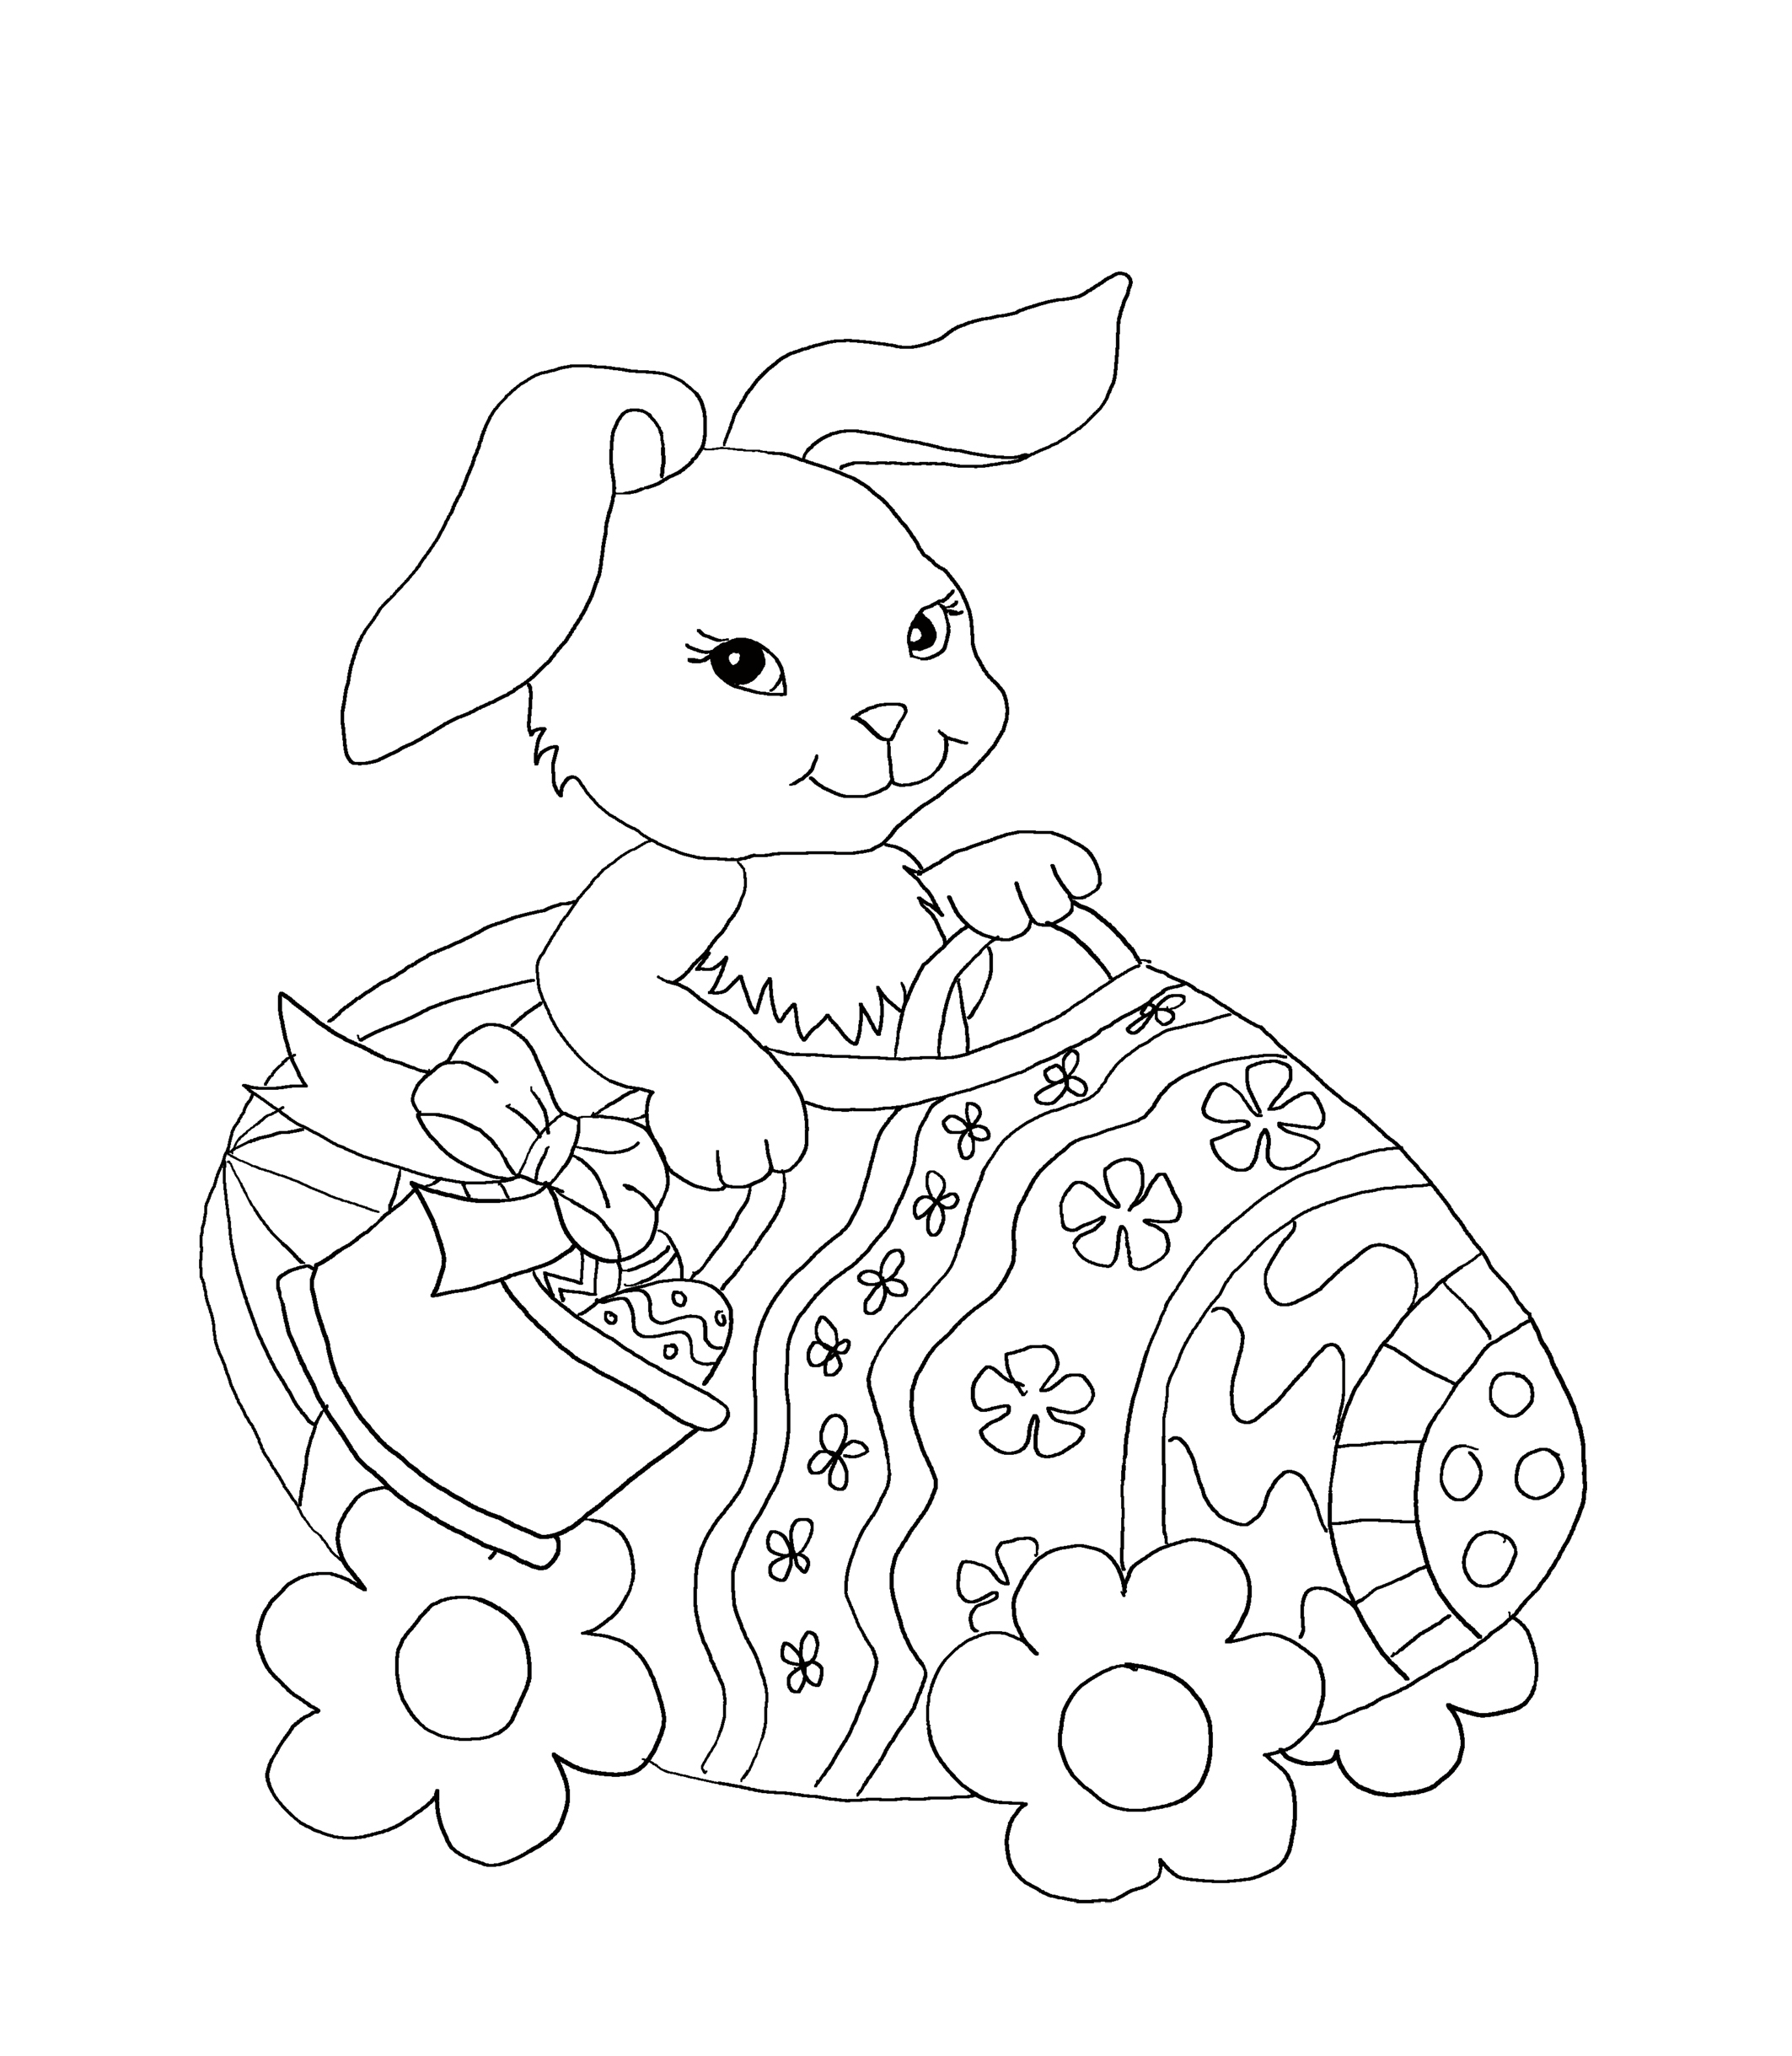 free-printable-easter-bunny-colouring-pages